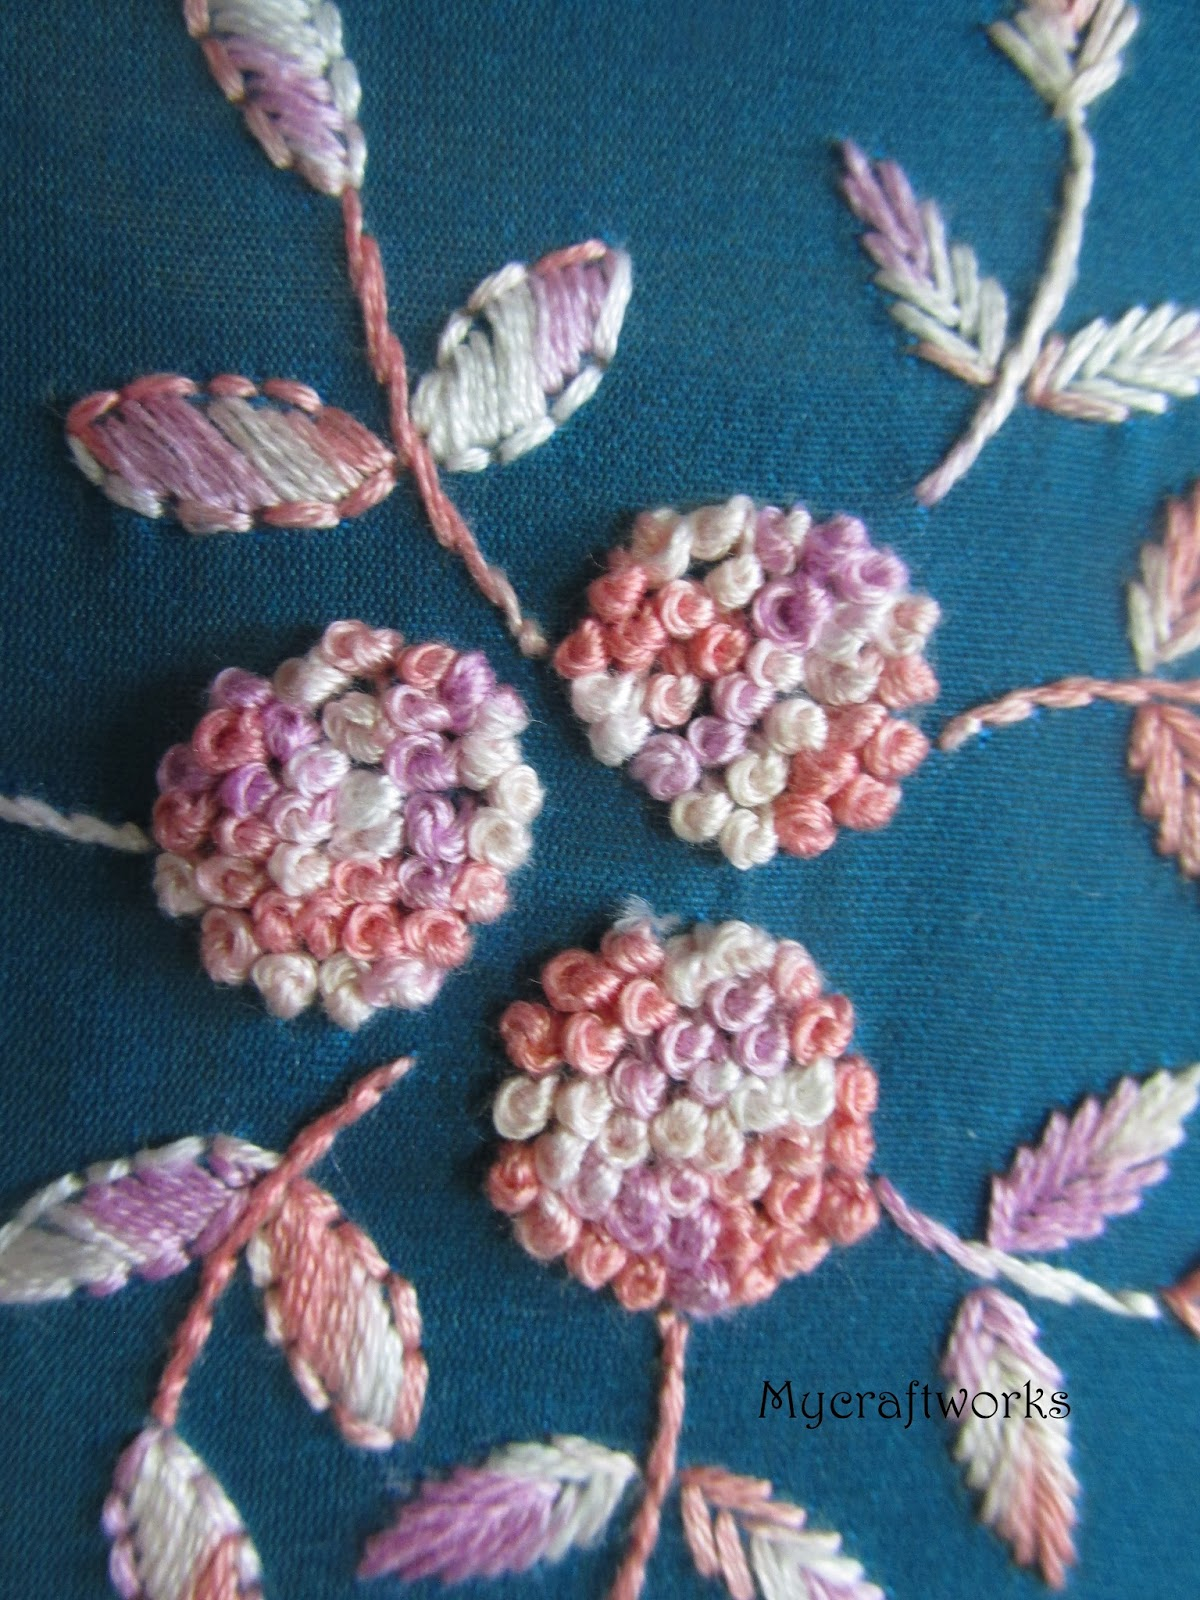 French Knots Embroidery Patterns My Craft Works Embroidery Pattern 3 French Knots Flower